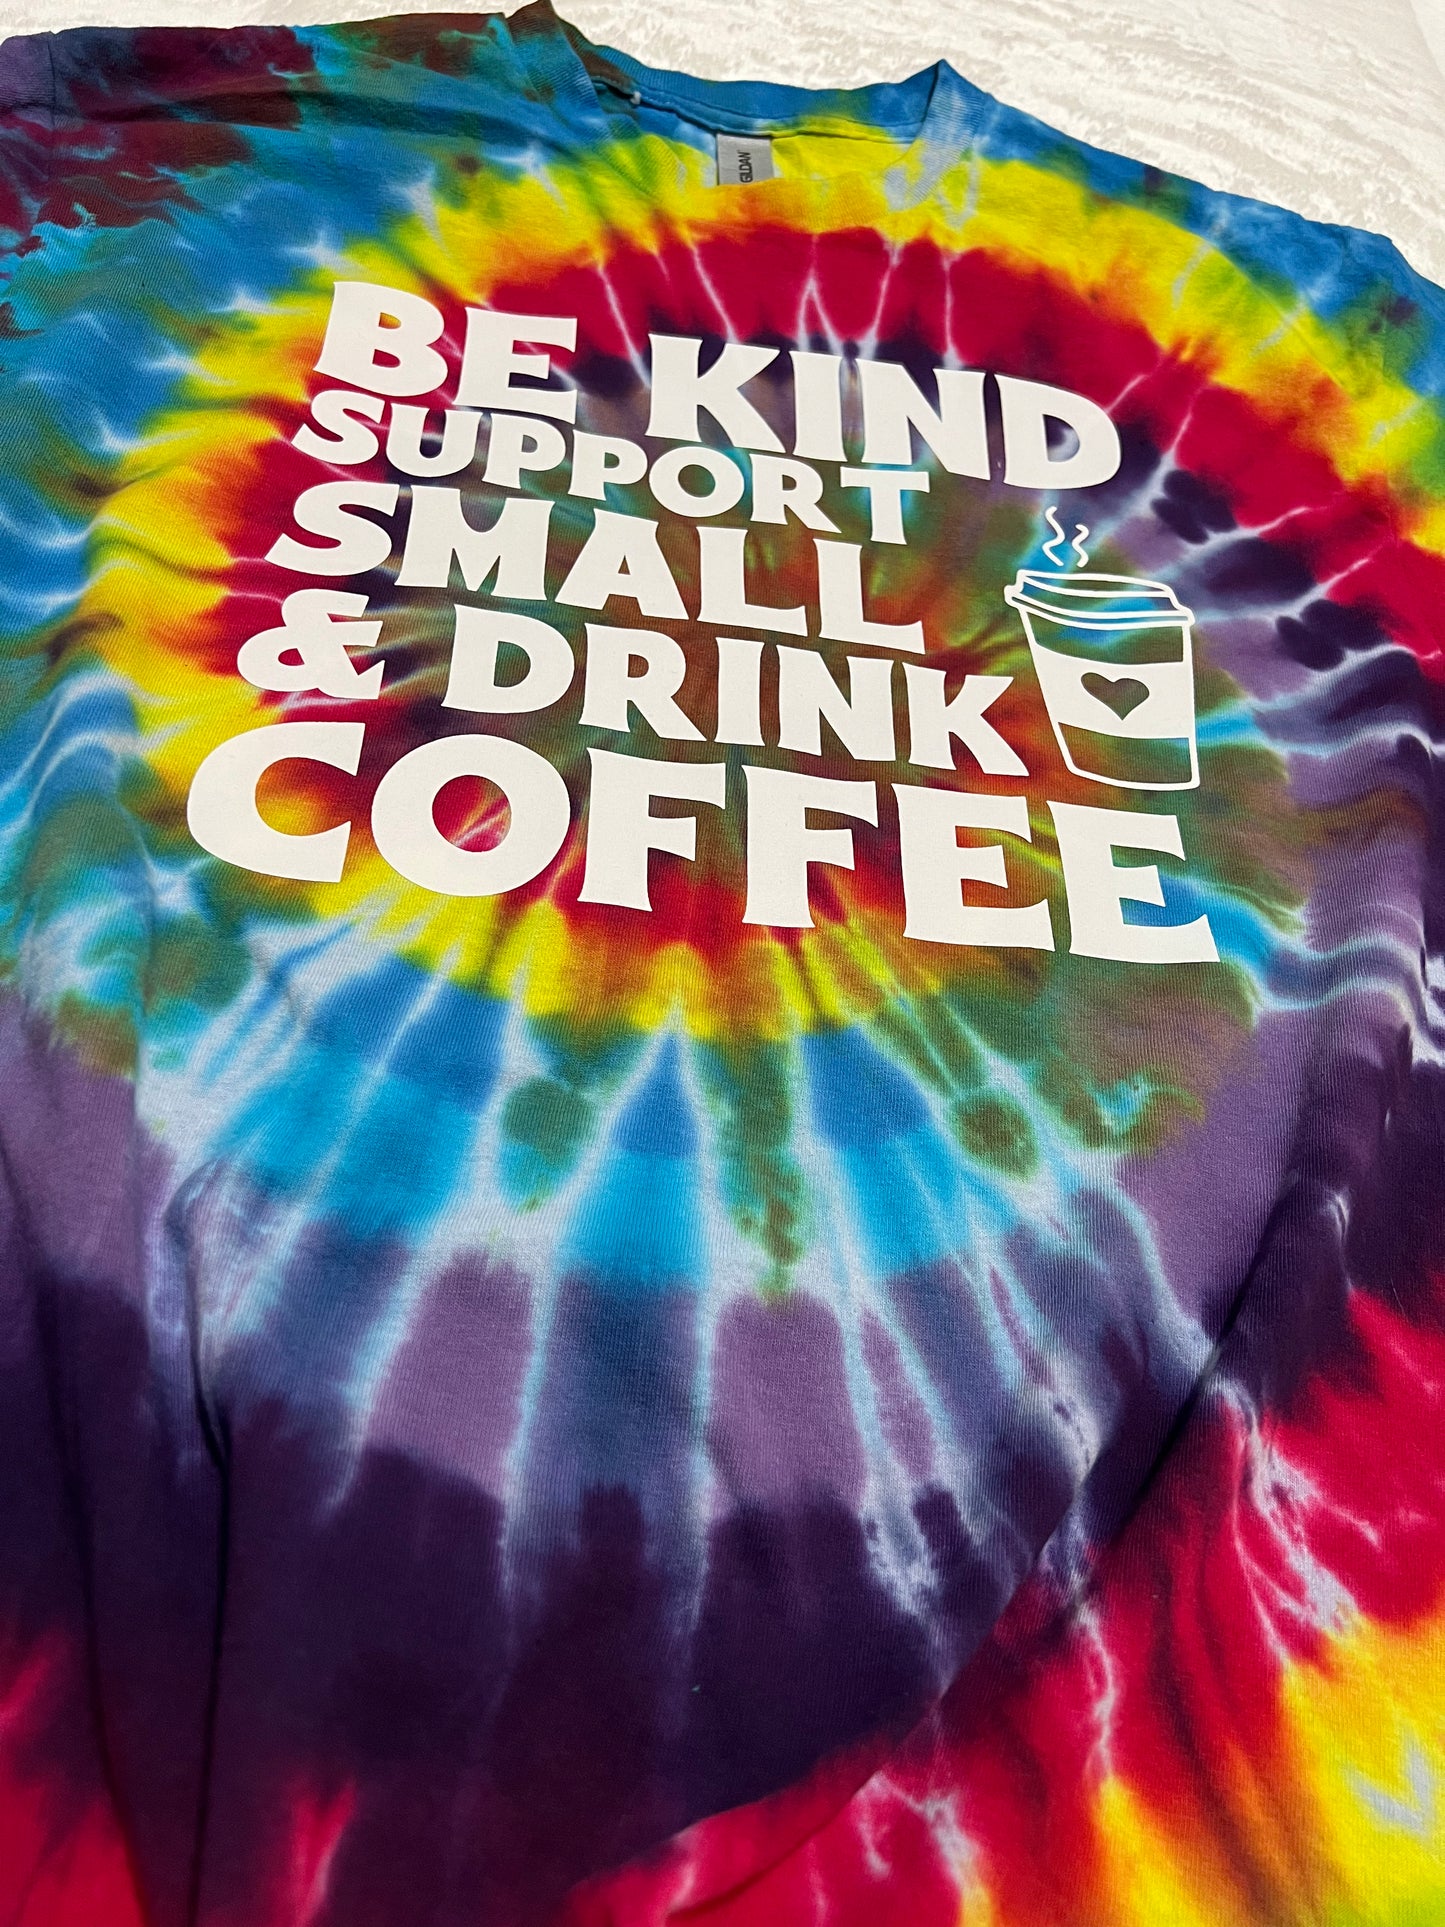 Be Kind Support Small & Drink Coffee Tie Dye Tee